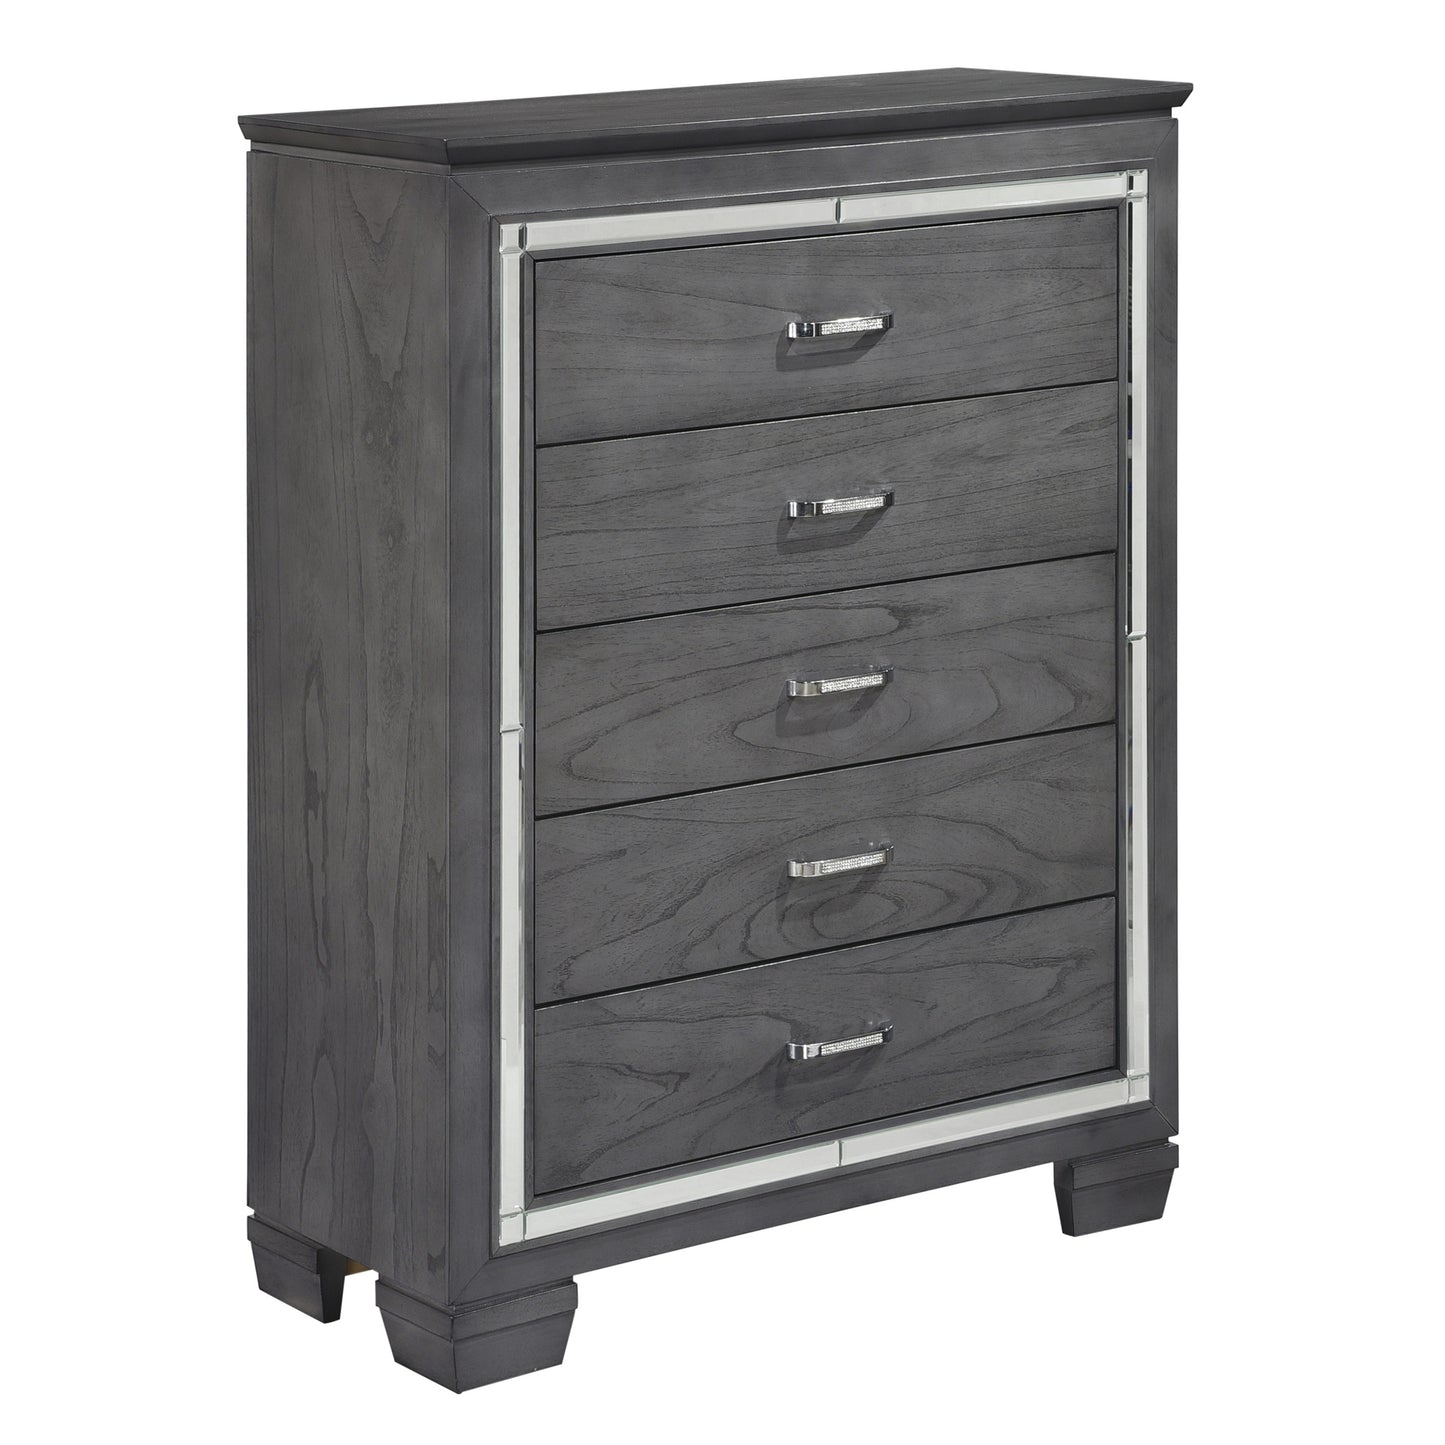 Homlegance Chest Allura Collection In Gray Finish